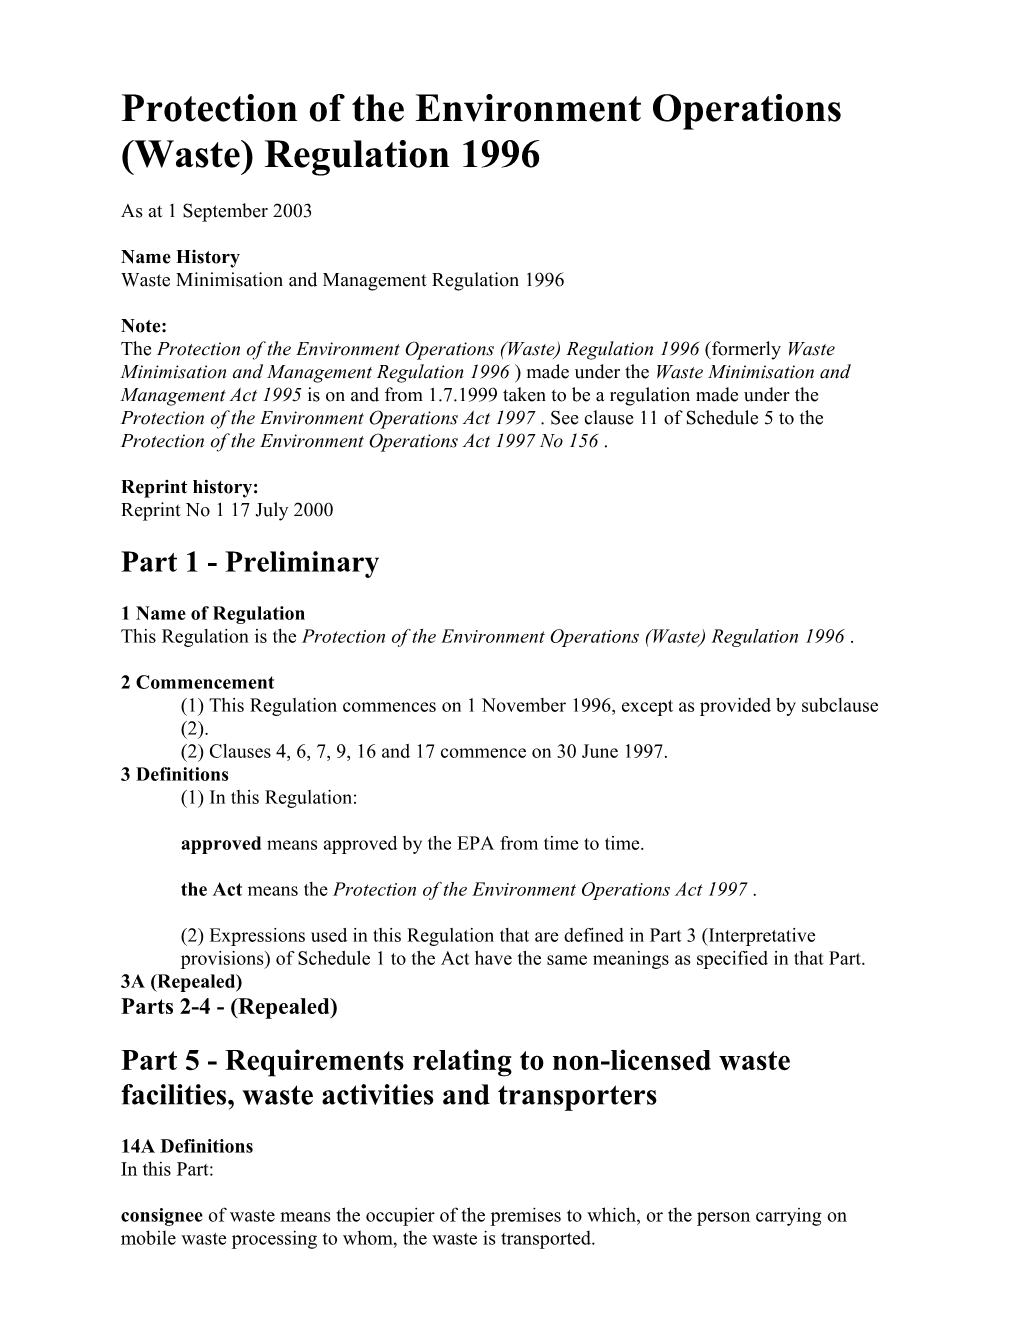 Protection of the Environment Operations (Waste) Regulation 1996